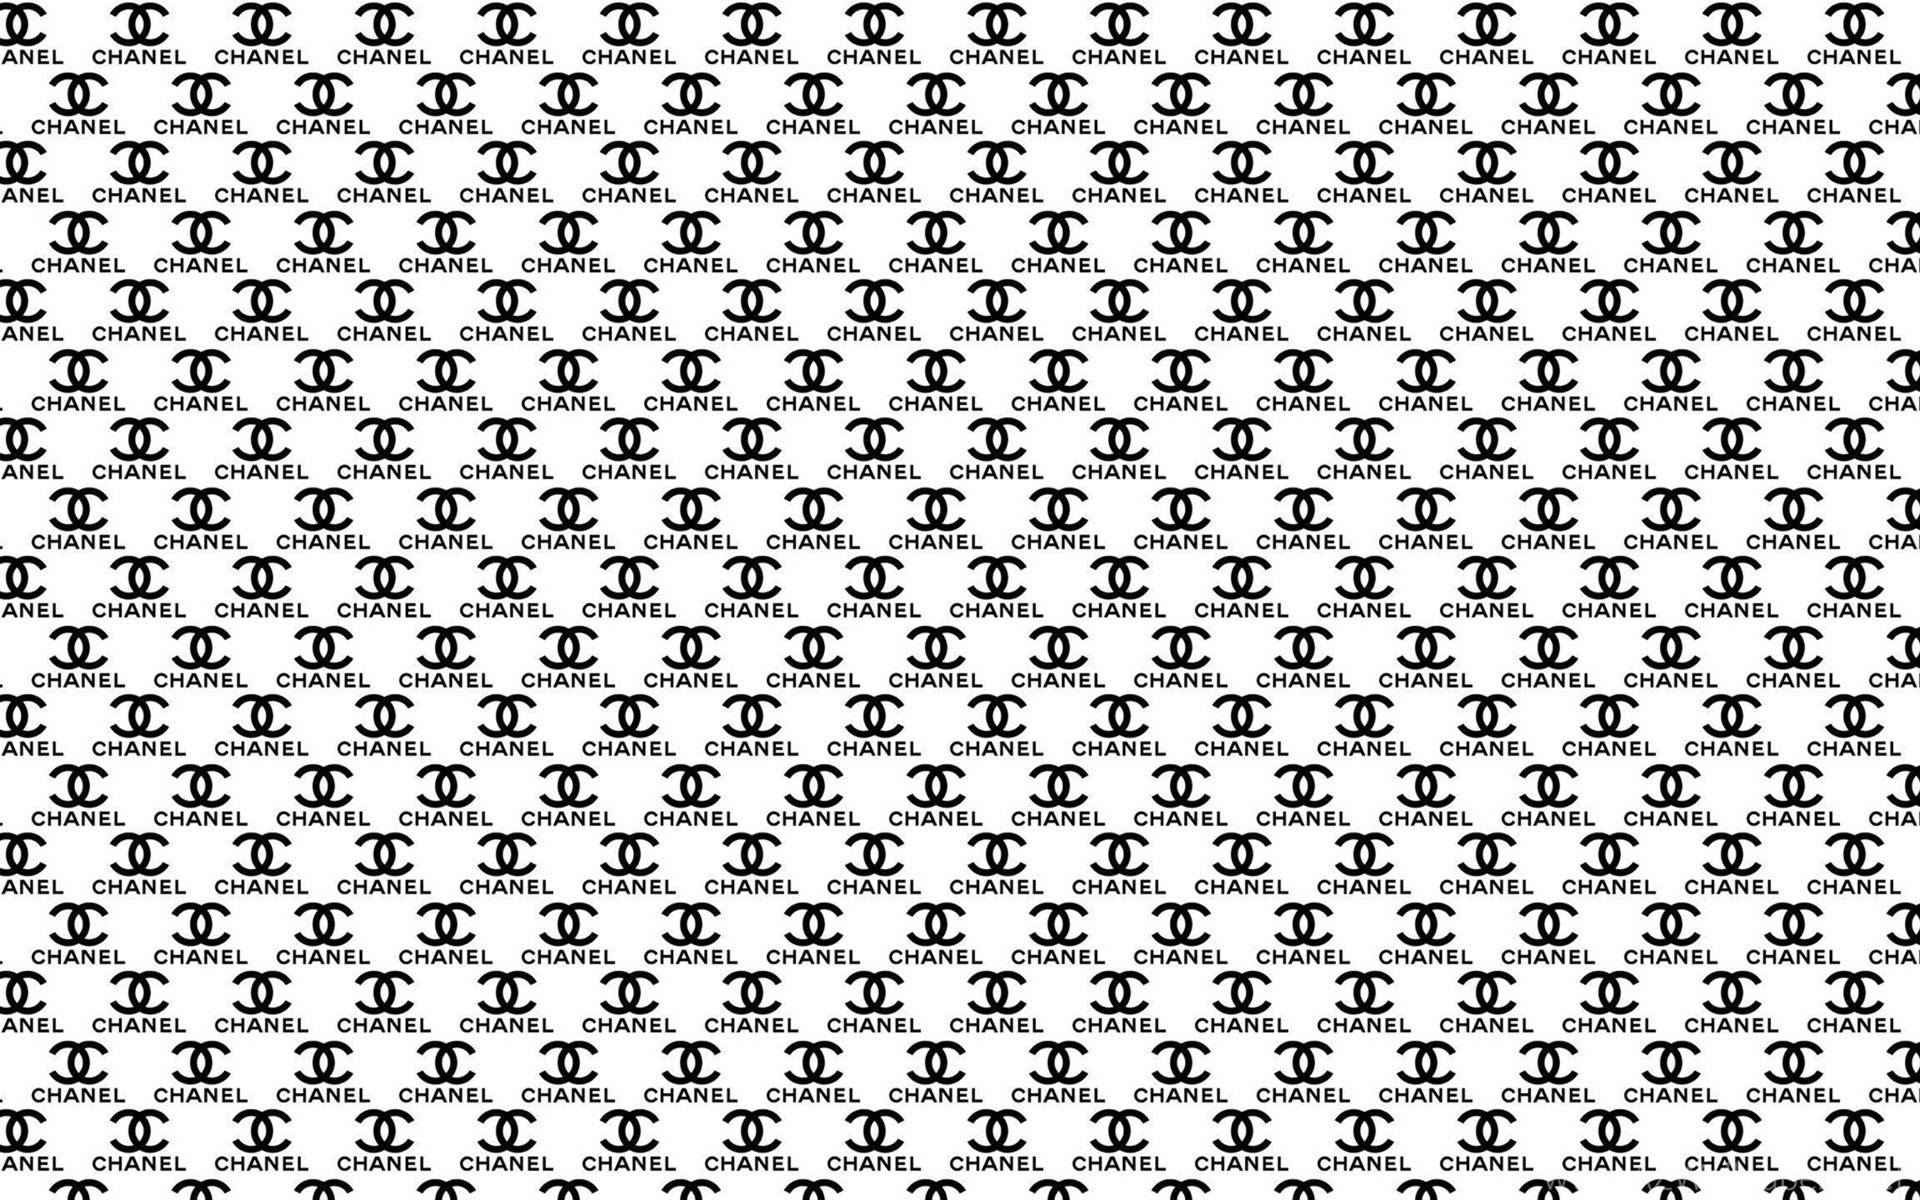 Chanel wallpaper by Plaigh - Download on ZEDGE™